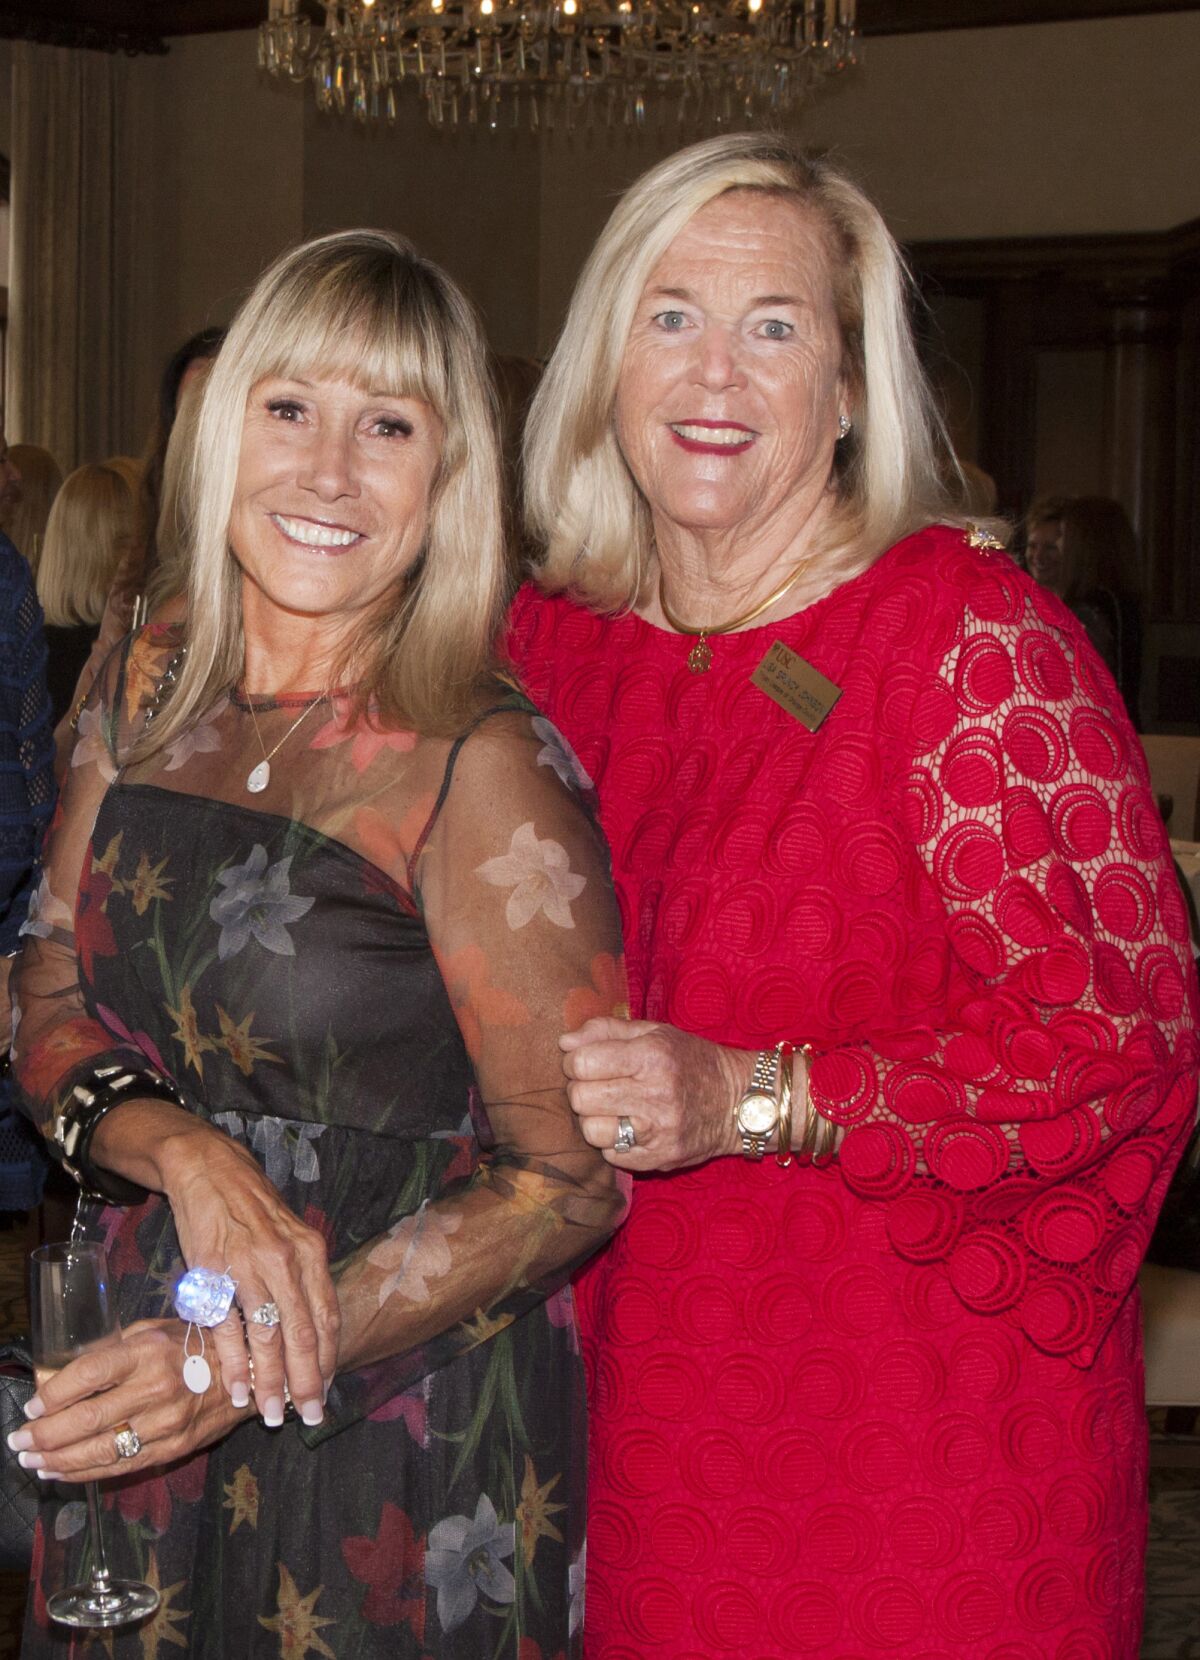 Tammy Cluck, Lisa Grundy Johnson support the Trojan League at "Diamonds Are A Girls Best Friend" event.